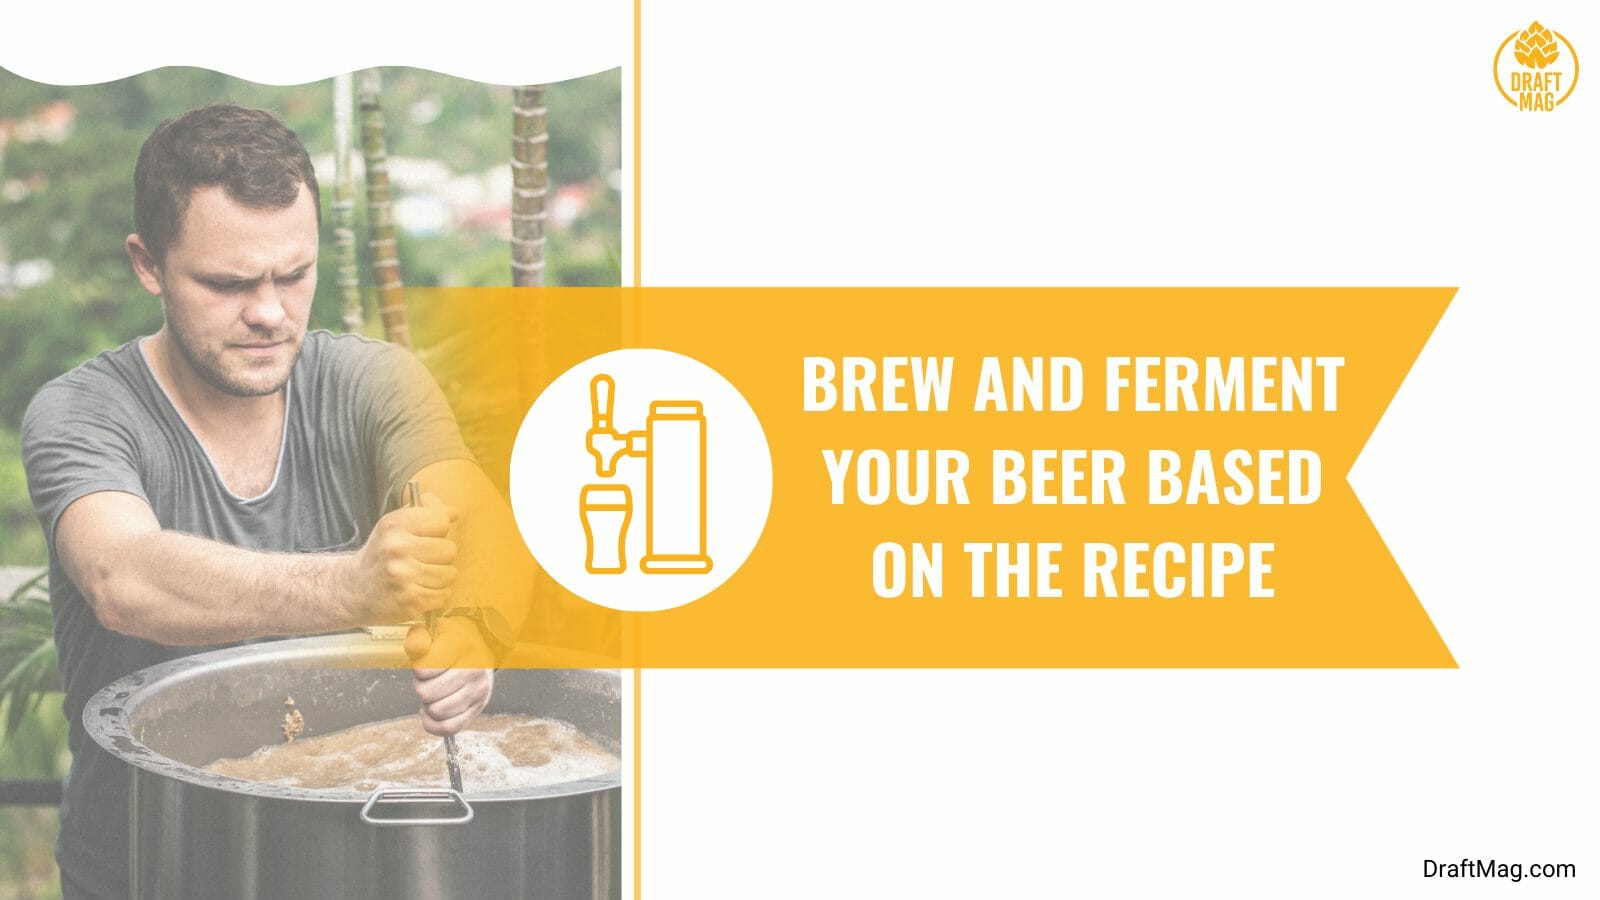 Ferment you beer using the recipe